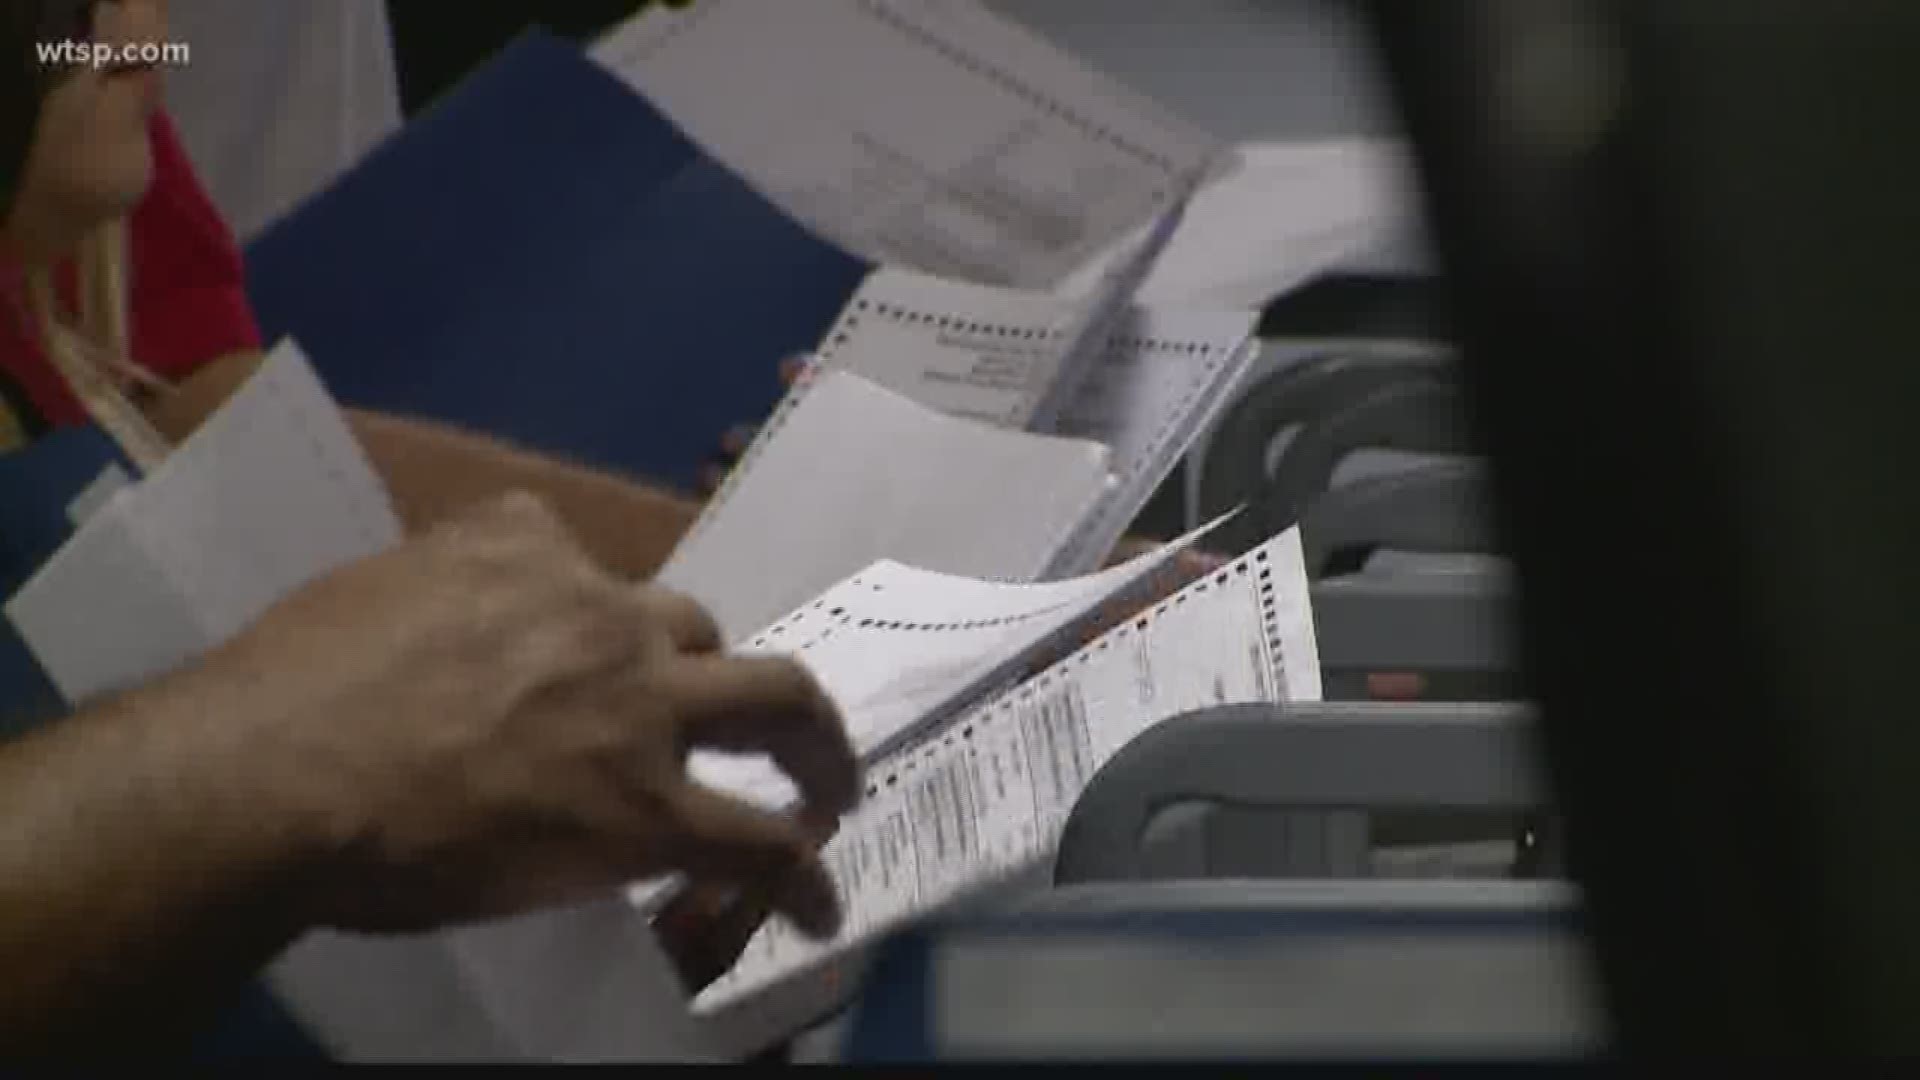 Florida is home to more than 2 million registered Latino voters, and the Trump campaign believes they have an opening with Latino voters because of the president's economic policies, which they say have contributed to low unemployment rates among Latinos, among other issues. Republicans see an opportunity particularly in South Florida, where the sizable Cuban population tends to lean conservative.